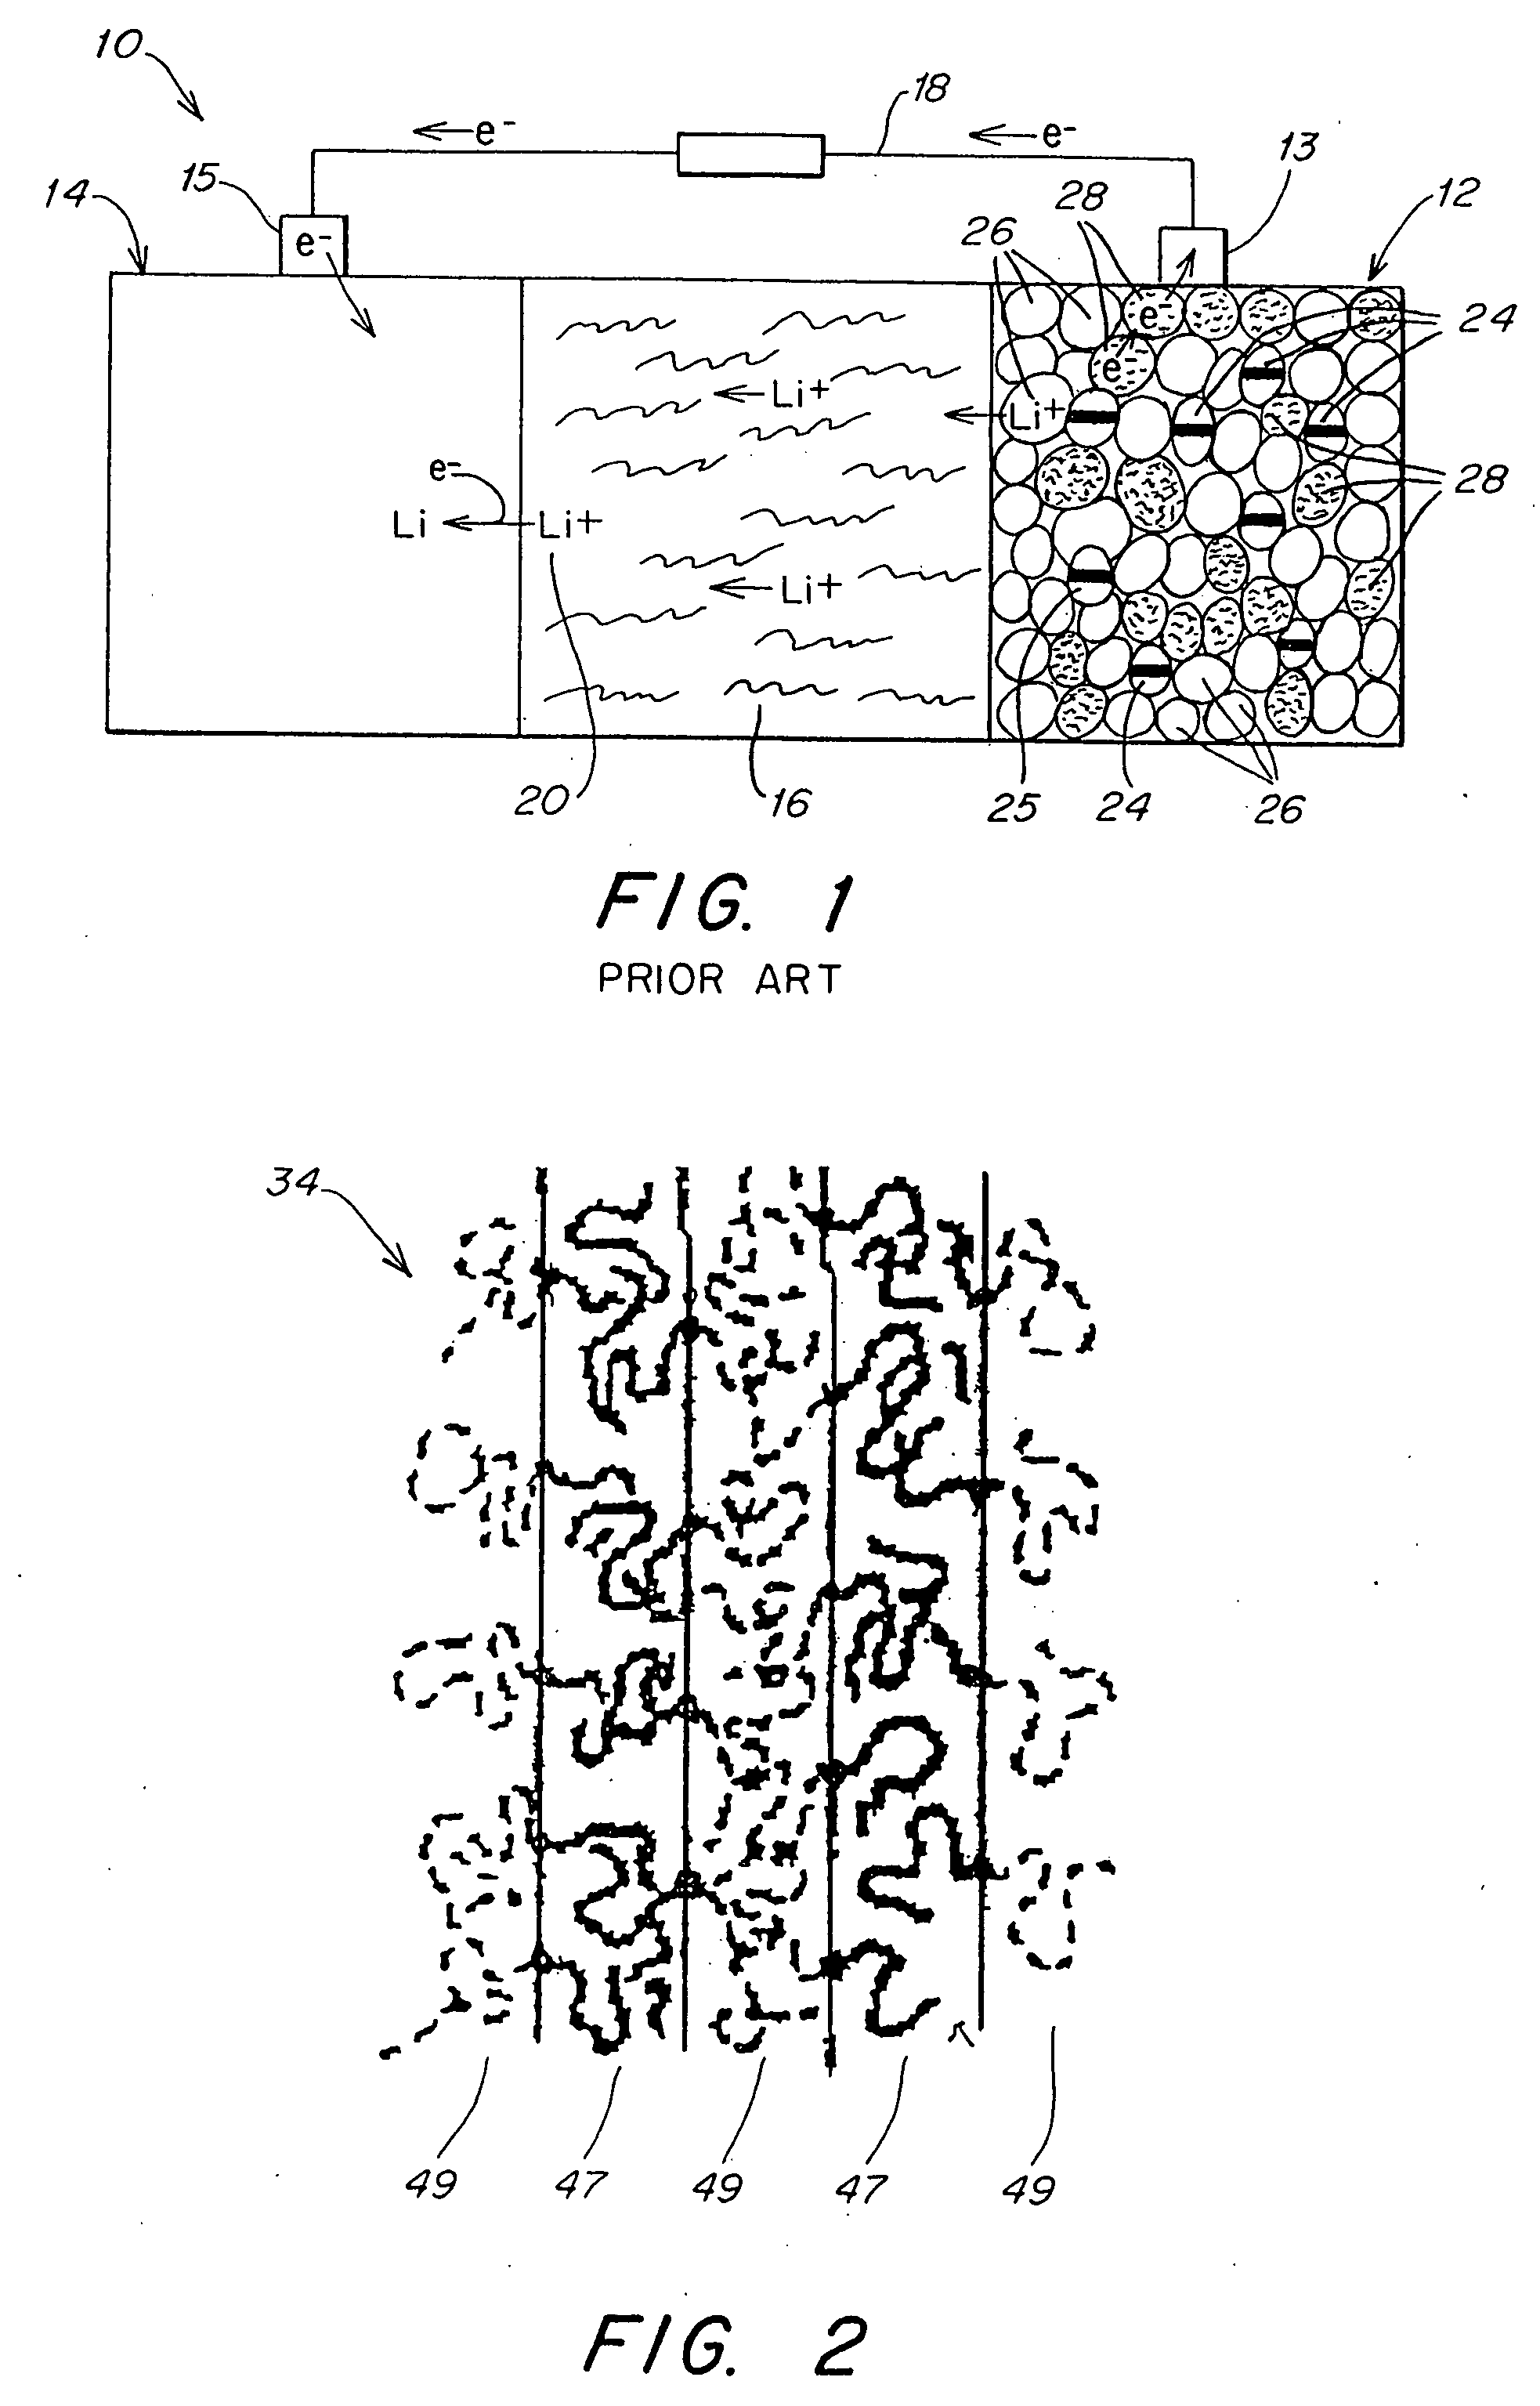 Polymer electrolyte, intercalation compounds and electrodes for batteries